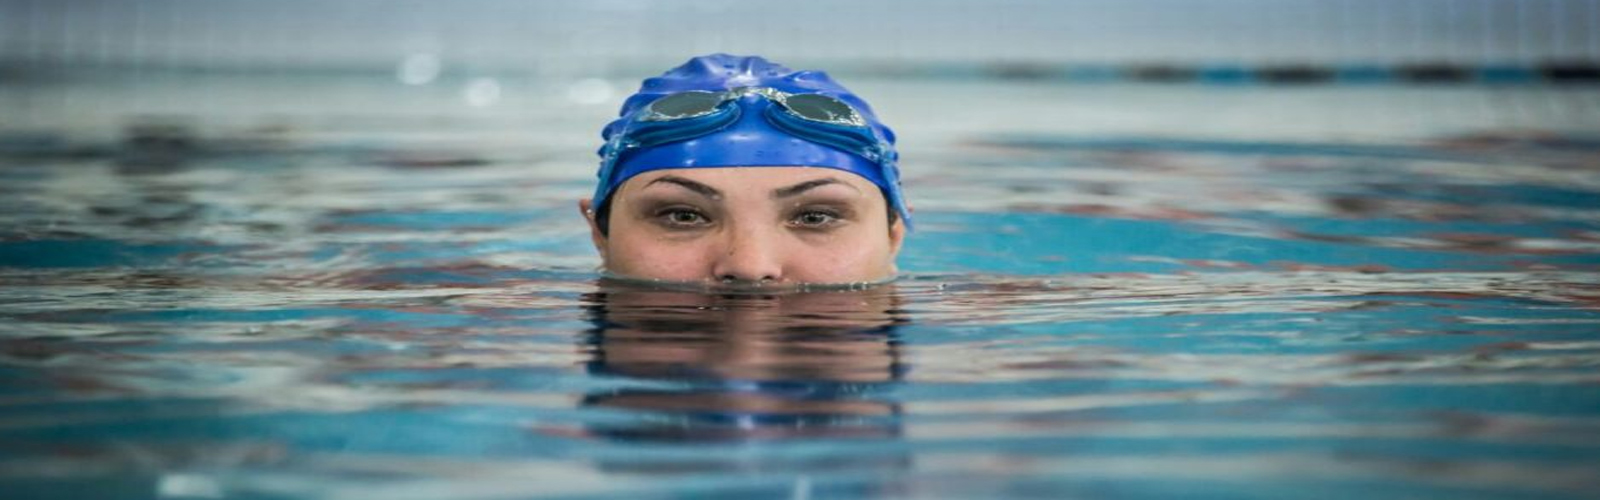 Afghan women swimmers defy threats for Olympic dream